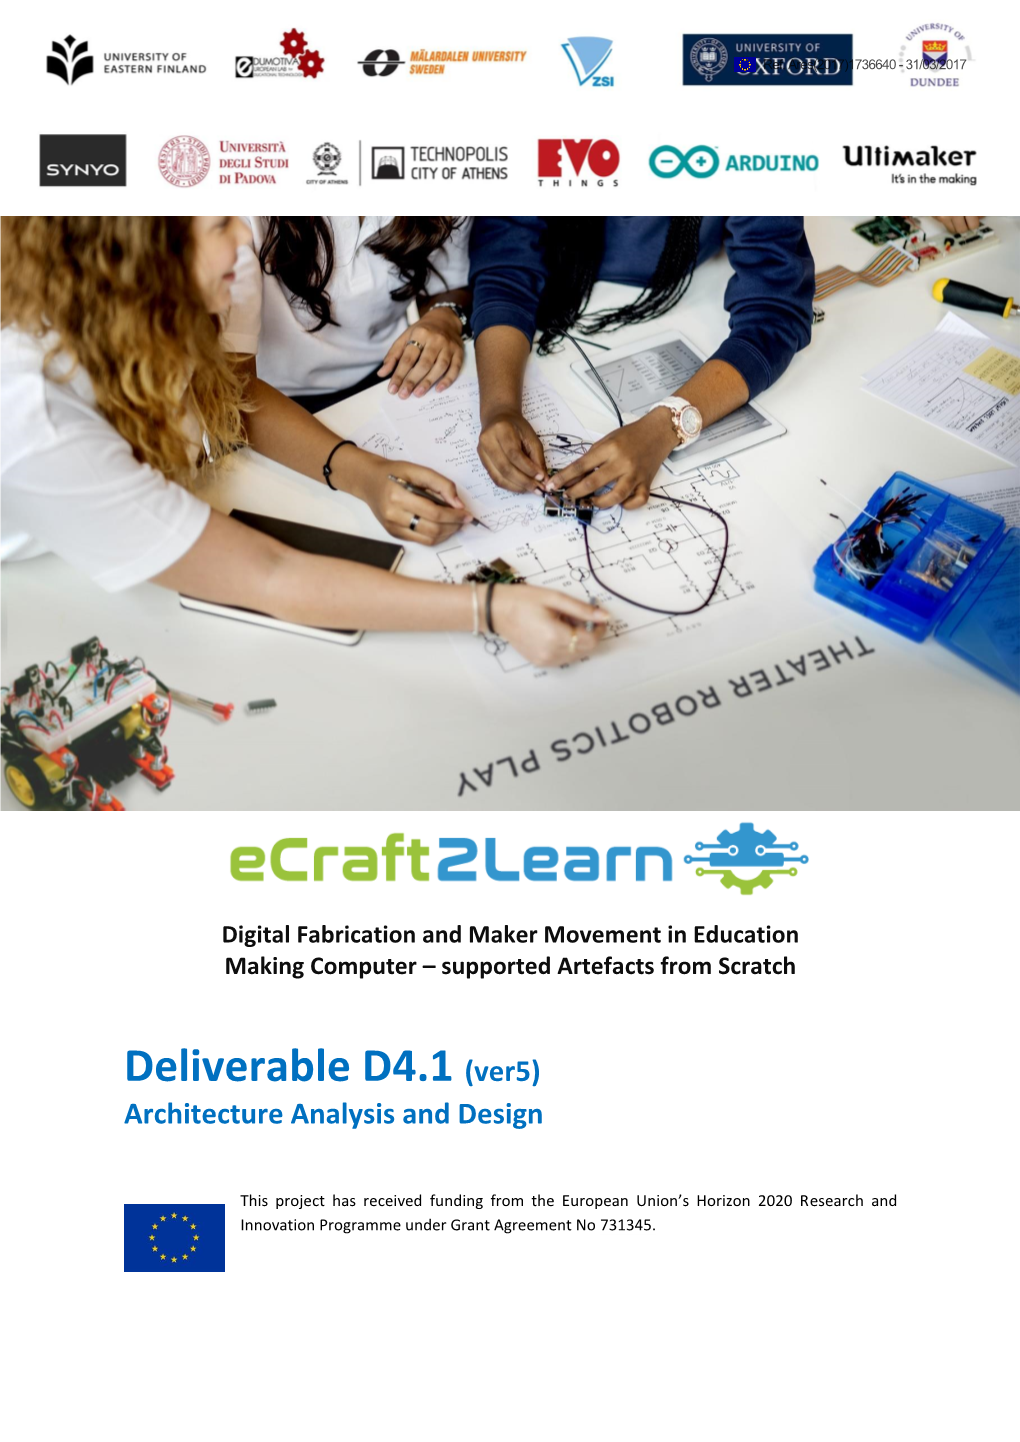 Deliverable D4.1 (Ver5) Architecture Analysis and Design